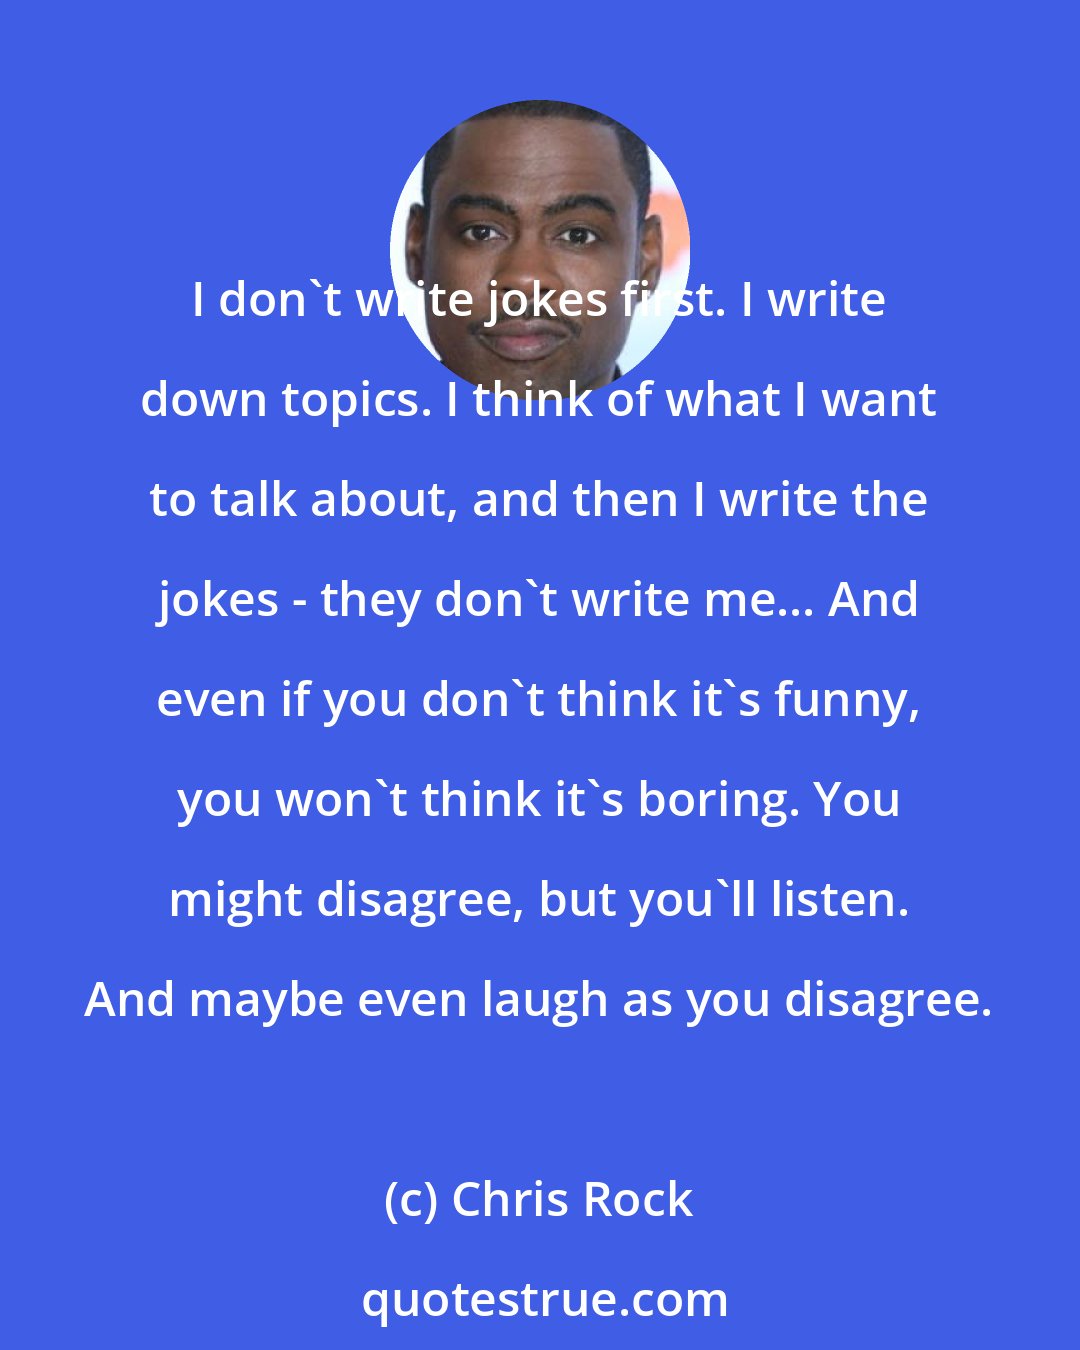 Chris Rock: I don't write jokes first. I write down topics. I think of what I want to talk about, and then I write the jokes - they don't write me... And even if you don't think it's funny, you won't think it's boring. You might disagree, but you'll listen. And maybe even laugh as you disagree.